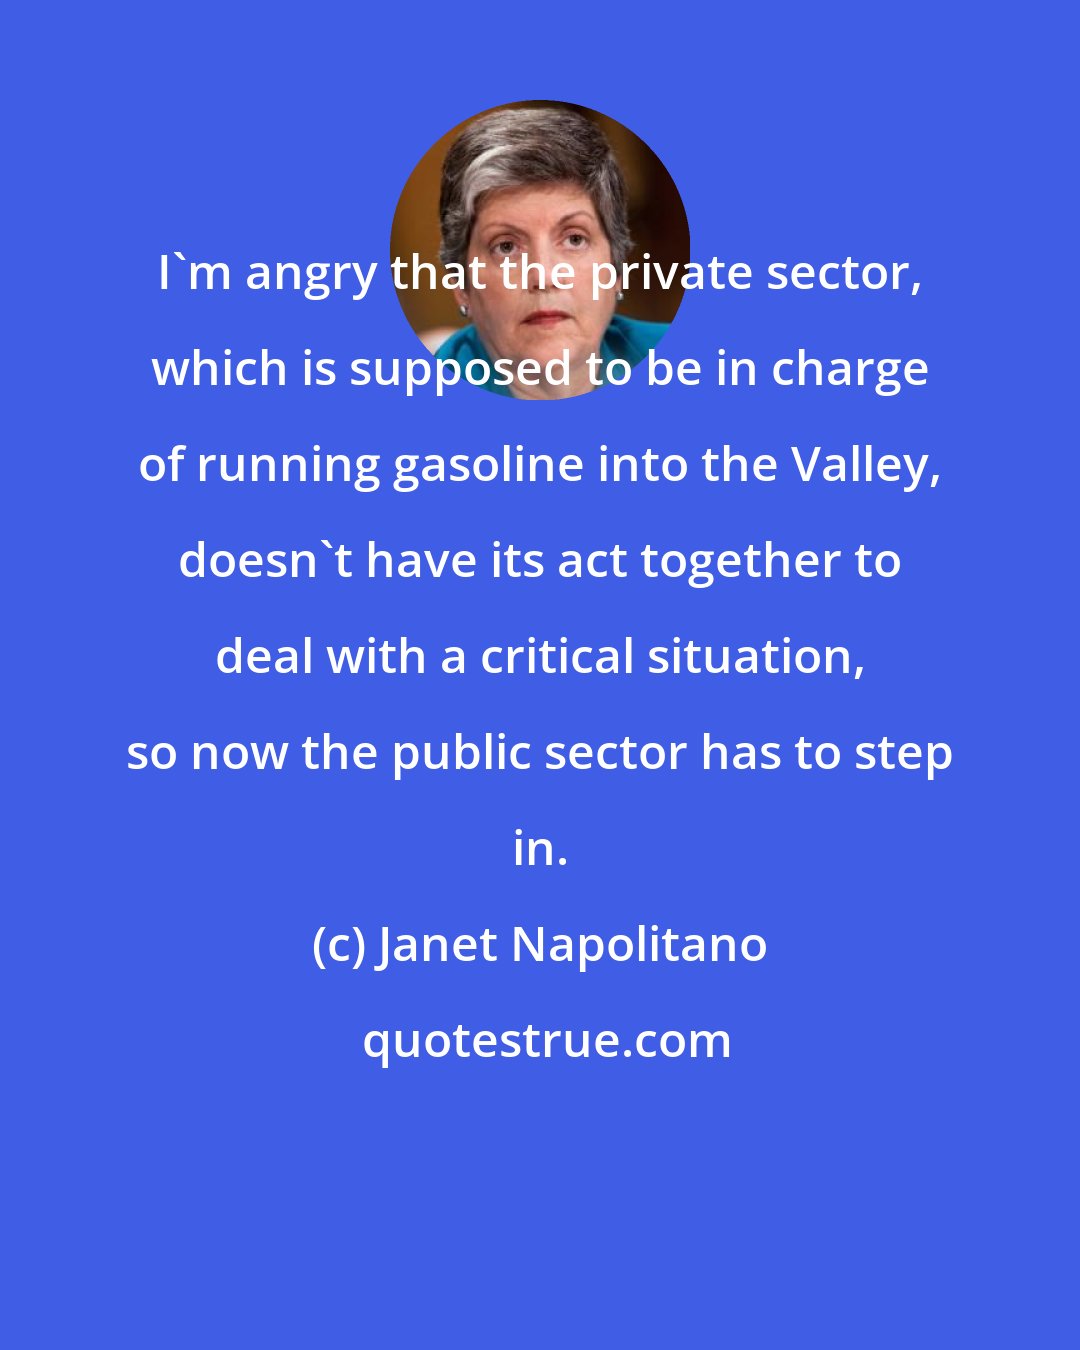 Janet Napolitano: I'm angry that the private sector, which is supposed to be in charge of running gasoline into the Valley, doesn't have its act together to deal with a critical situation, so now the public sector has to step in.